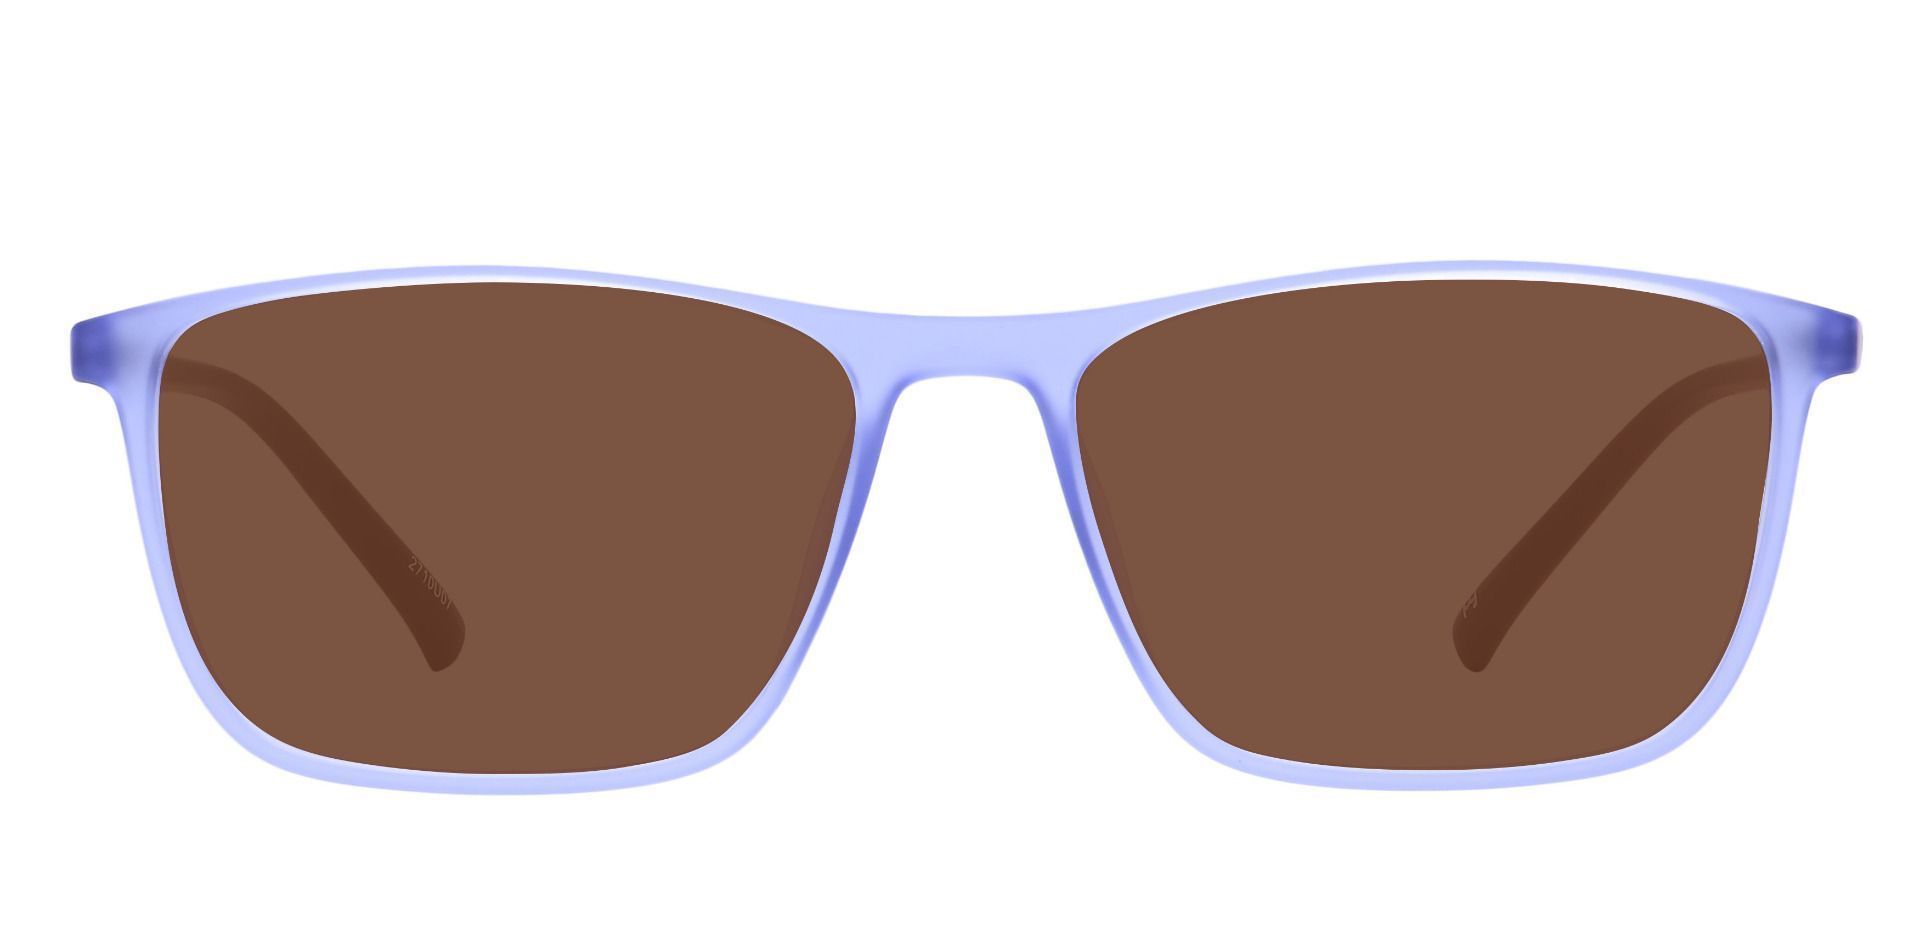 Candid Rectangle Progressive Sunglasses - Blue Frame With Brown Lenses